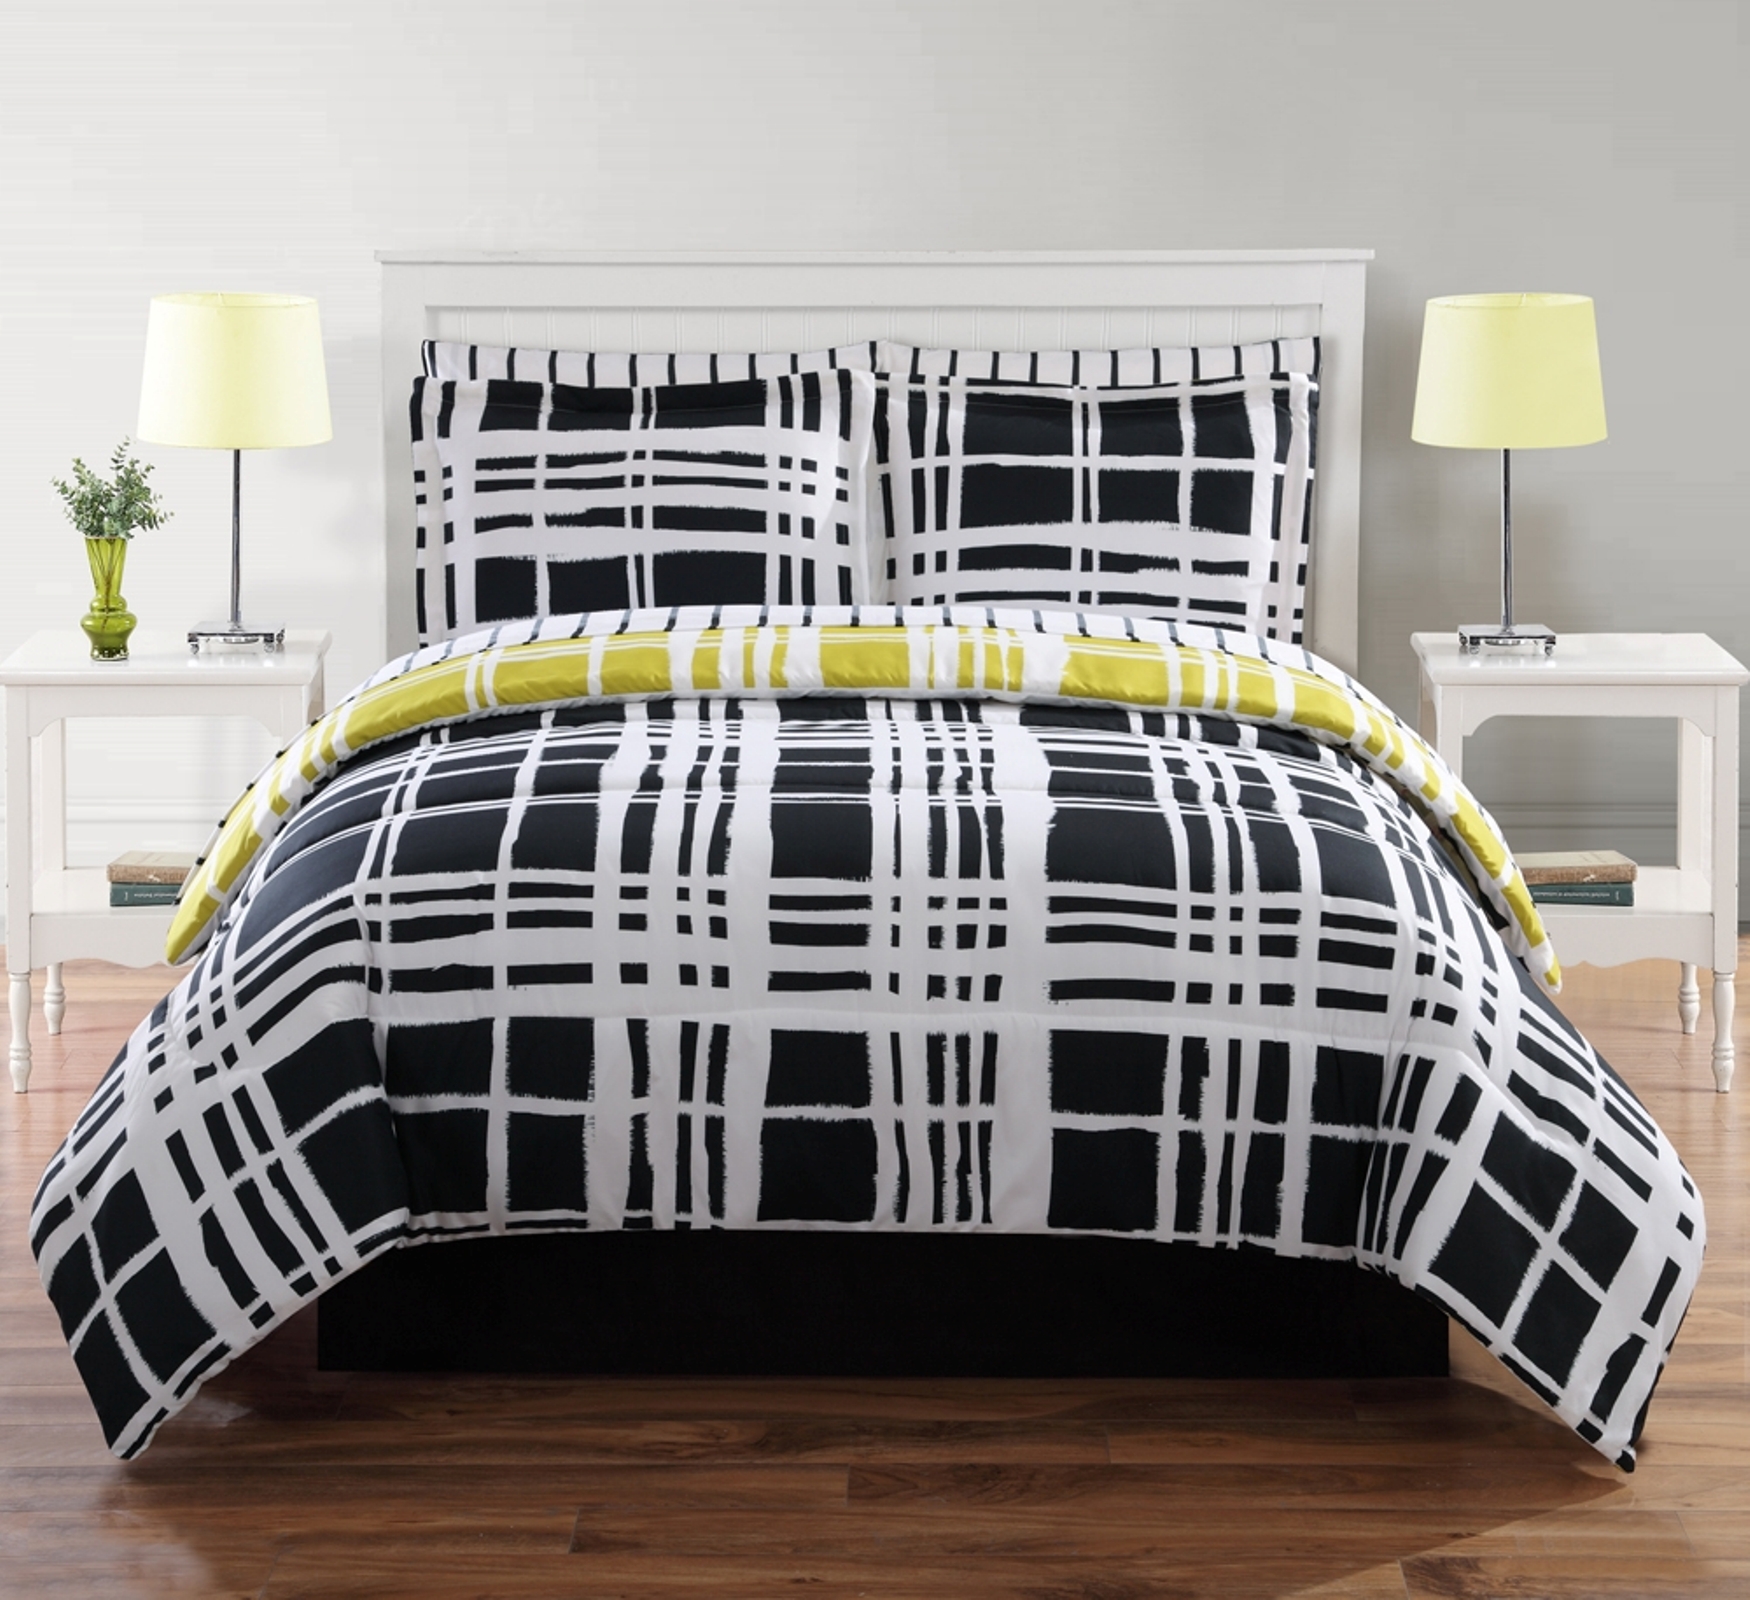 Complete Bed Set - 8 Piece Connor